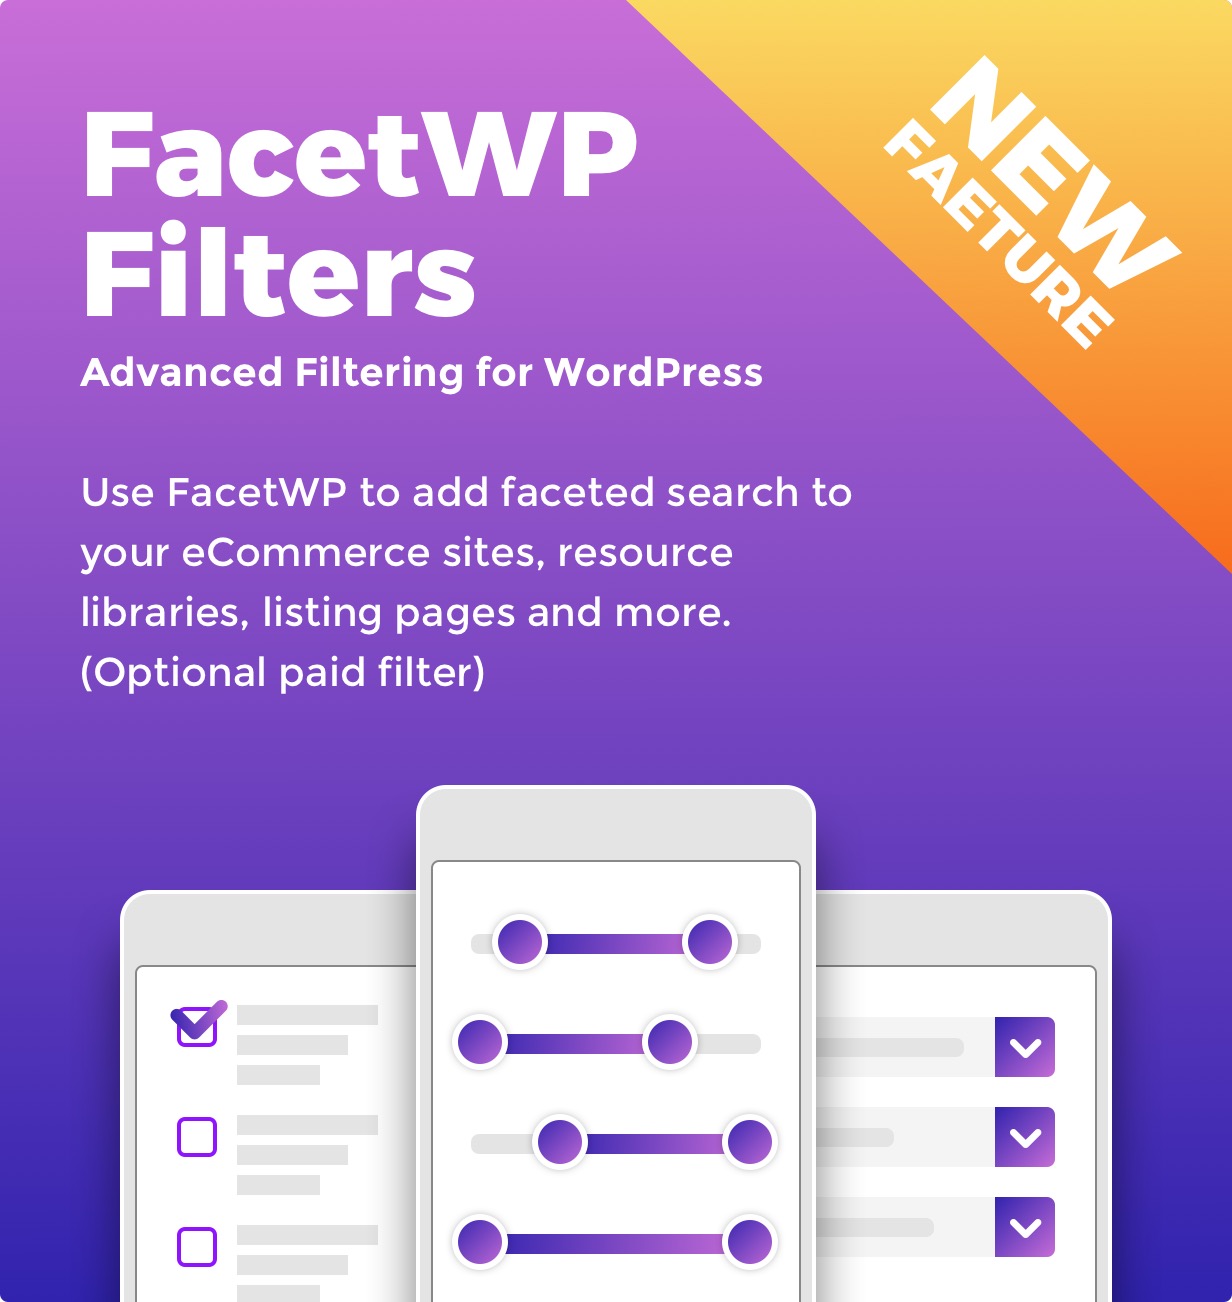 FacetWP Filters